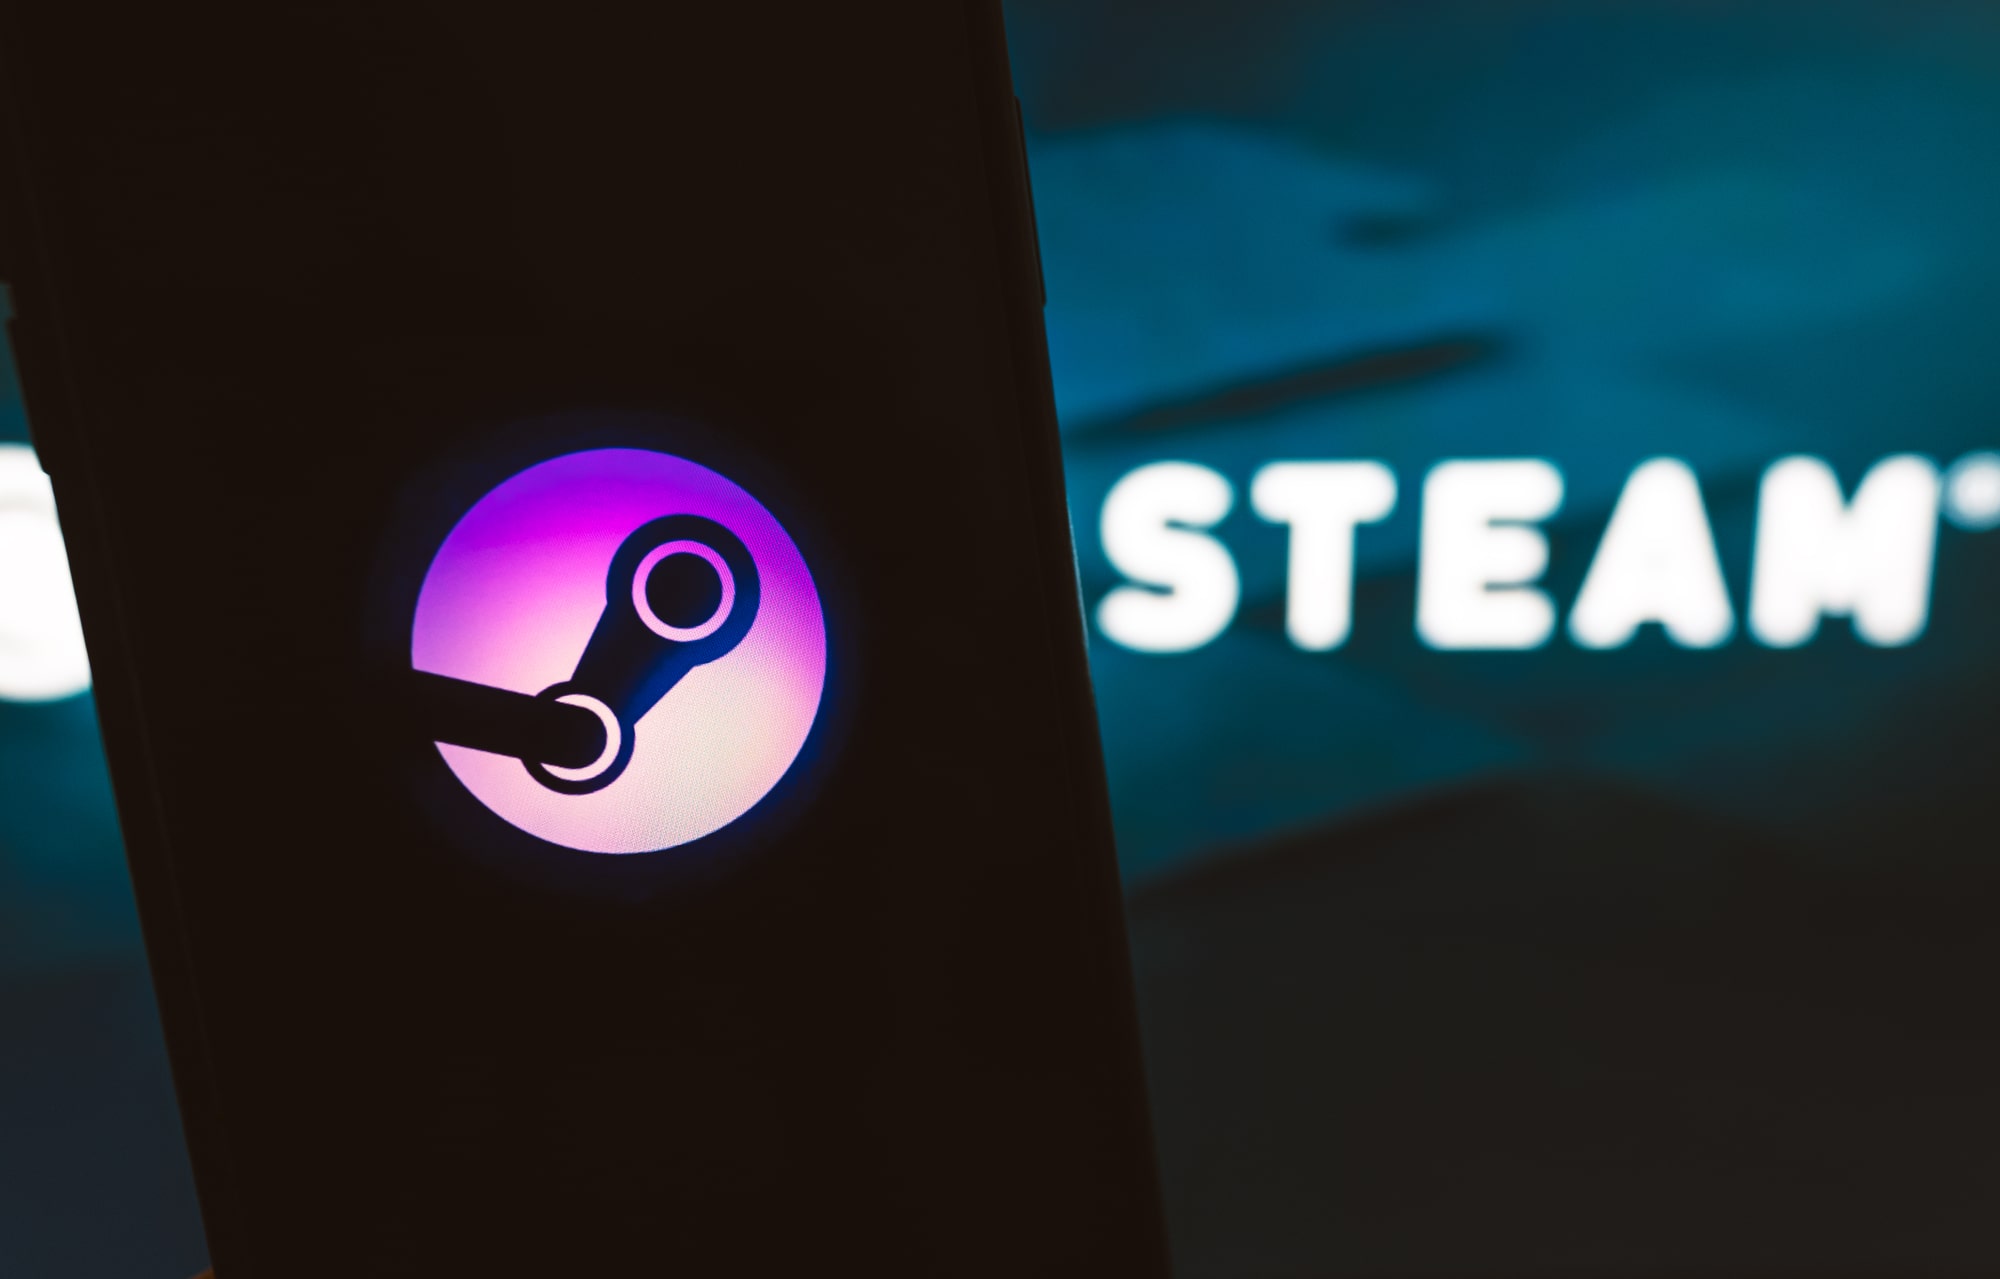 Valve is removing blockchain and NFT games from Steam